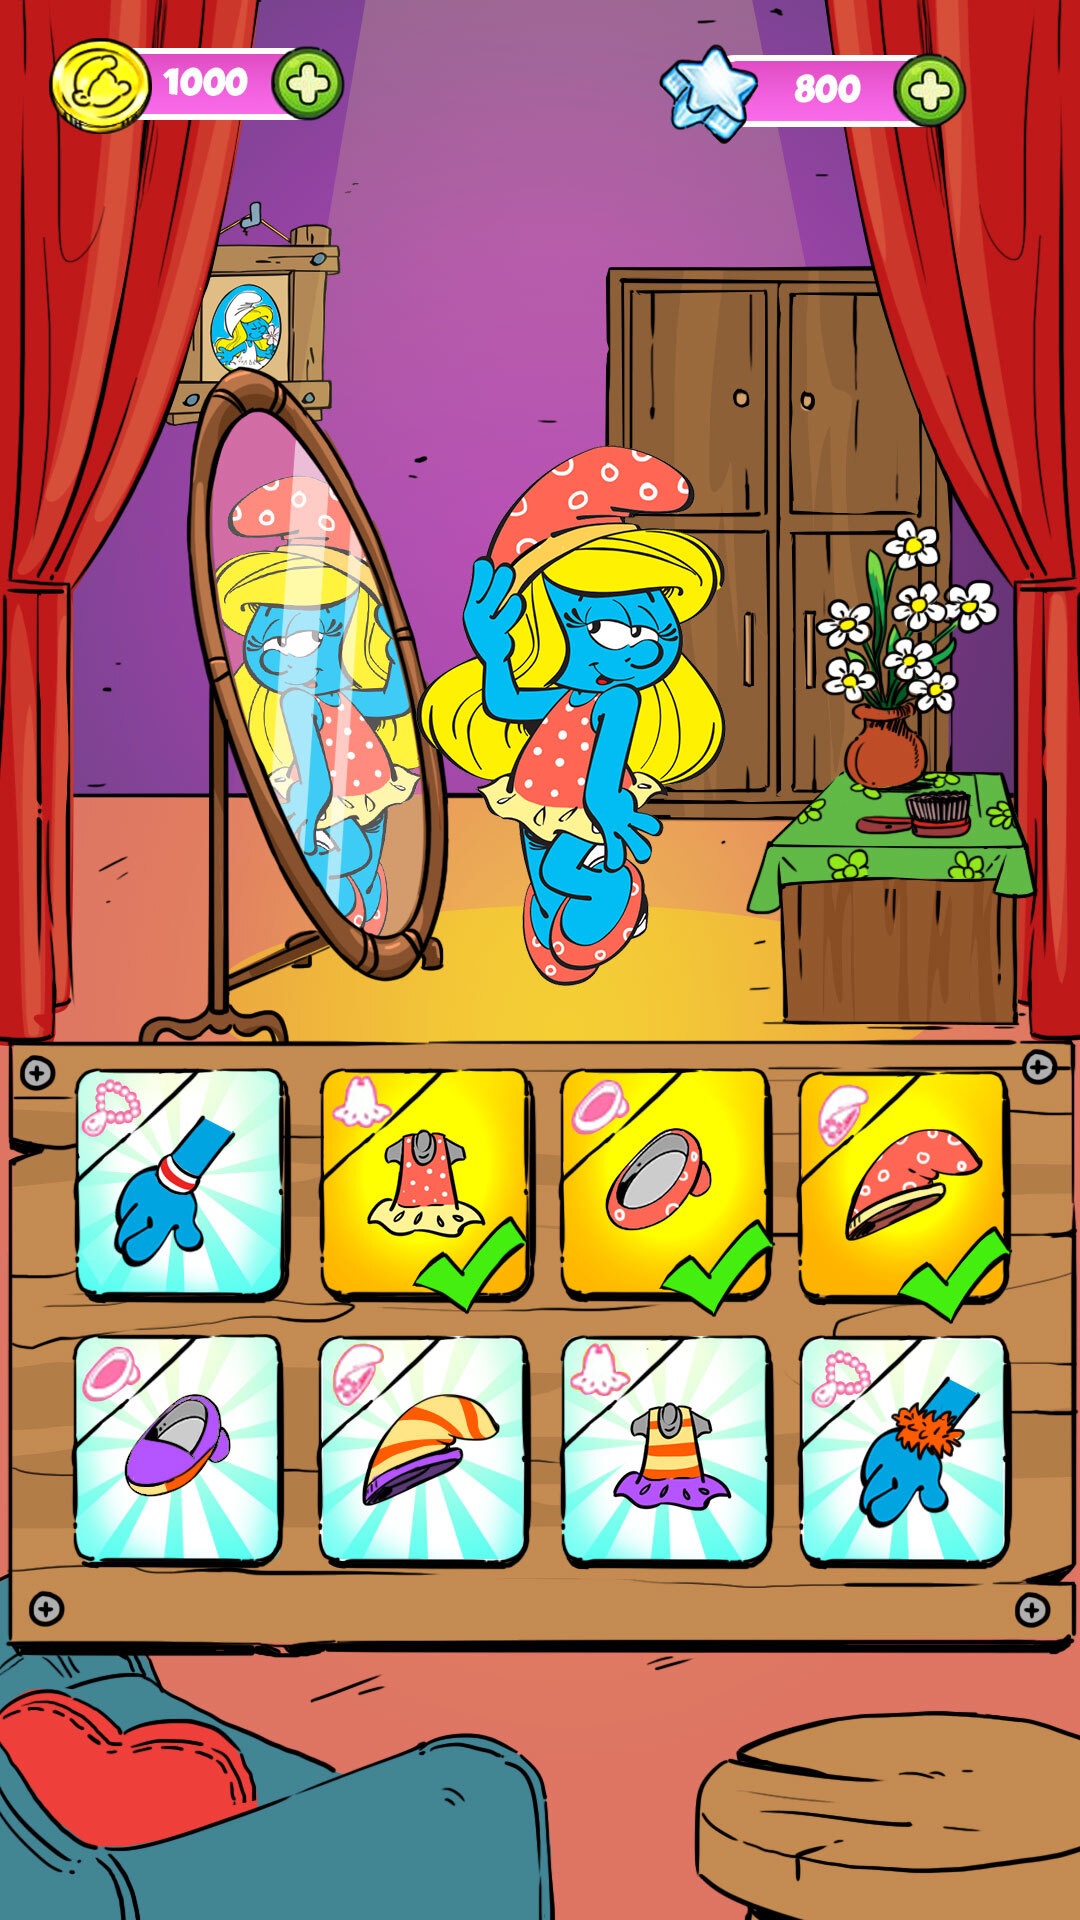 Smurfette's Magic Match for Android